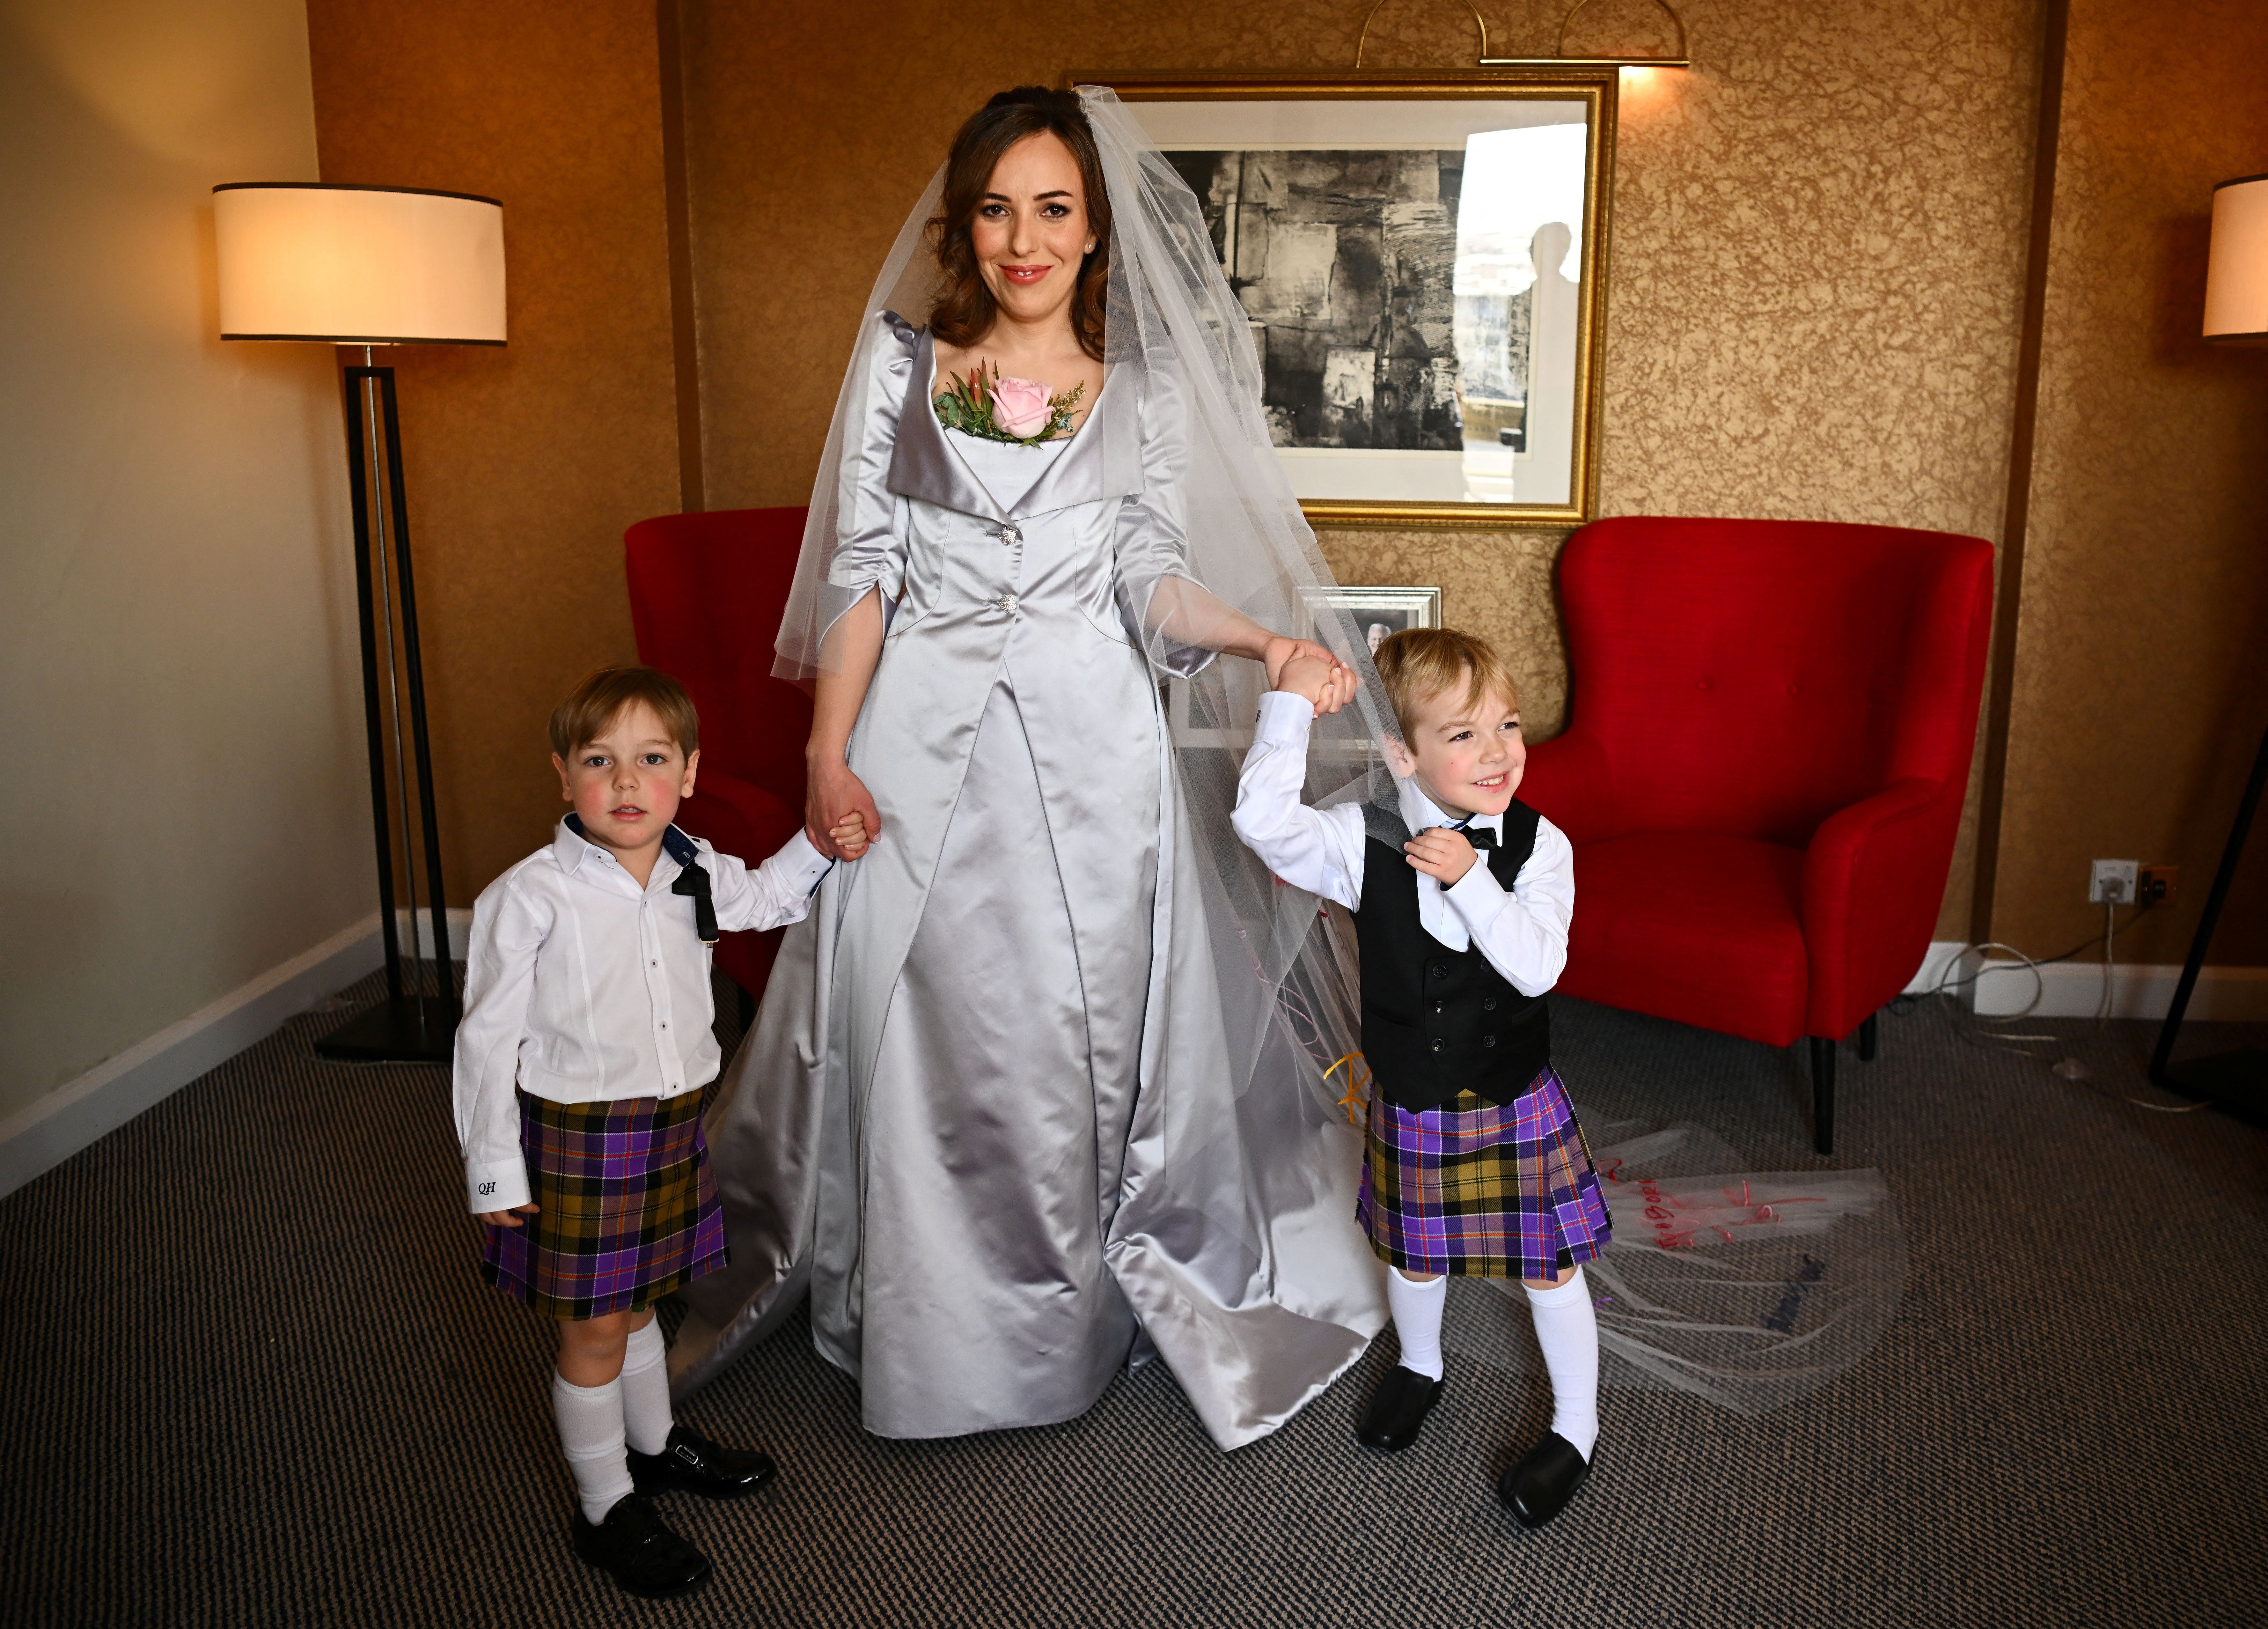 Stella Moris, the partner of Wikileaks founder Julian Assange, is photographed in her Vivienne Westwood designed wedding dress, with their sons Max, three, and Gabriel, four, at a hotel in London, ahead of the wedding ceremony (Dylan Martinez/PA)